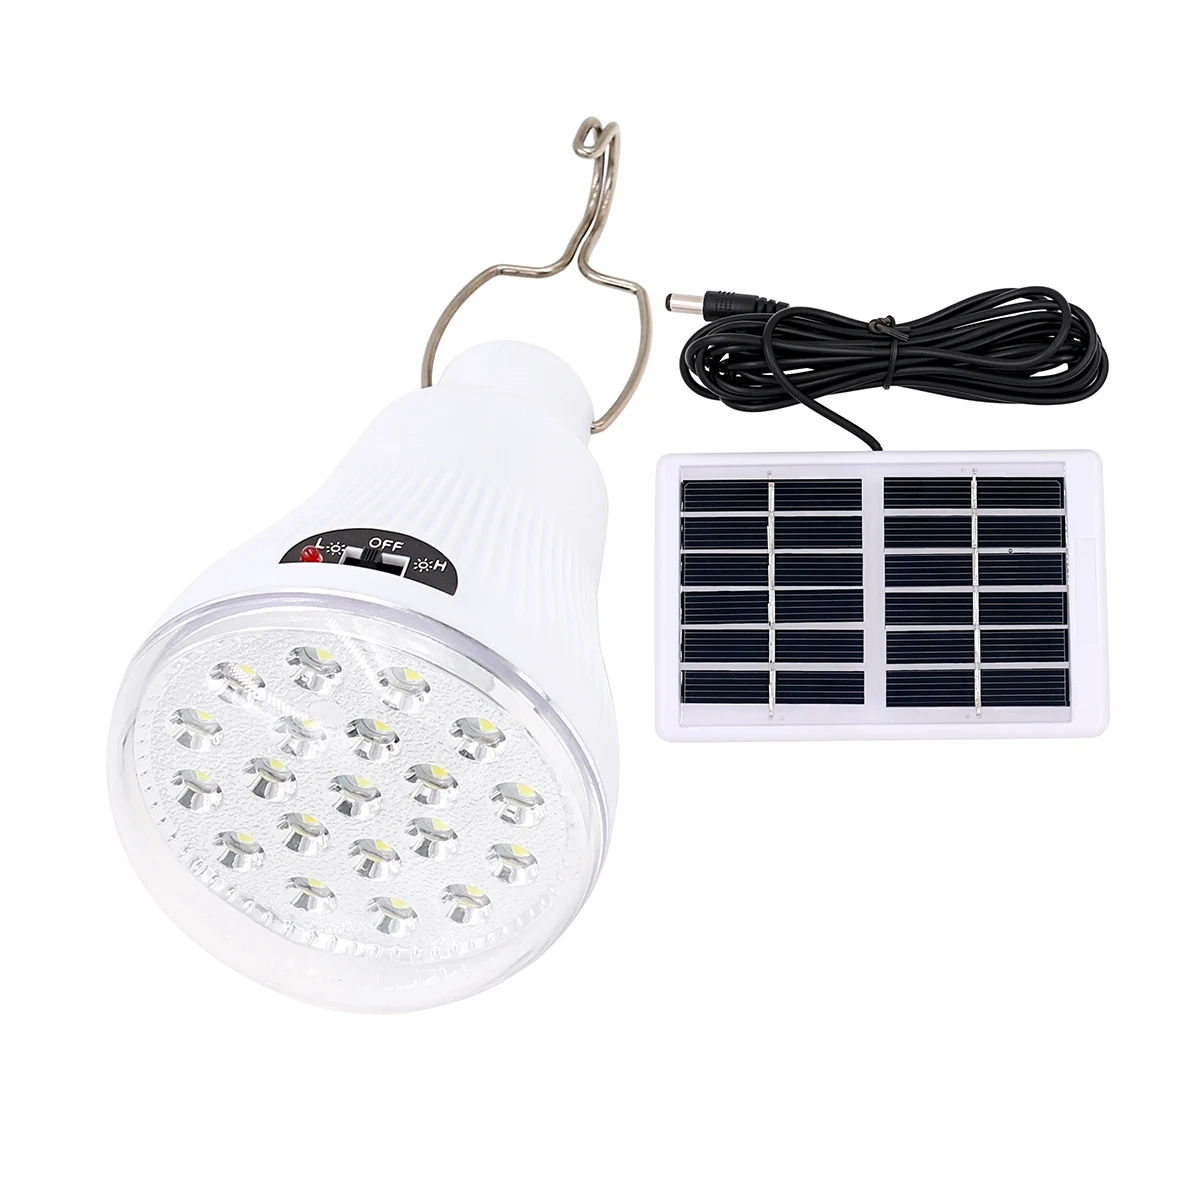 Baost 15W 130LM Portable LED Bulb Light Charged Solar Panel Energy Lamp for Home Lighting Indoor Outdoor Emergency Light